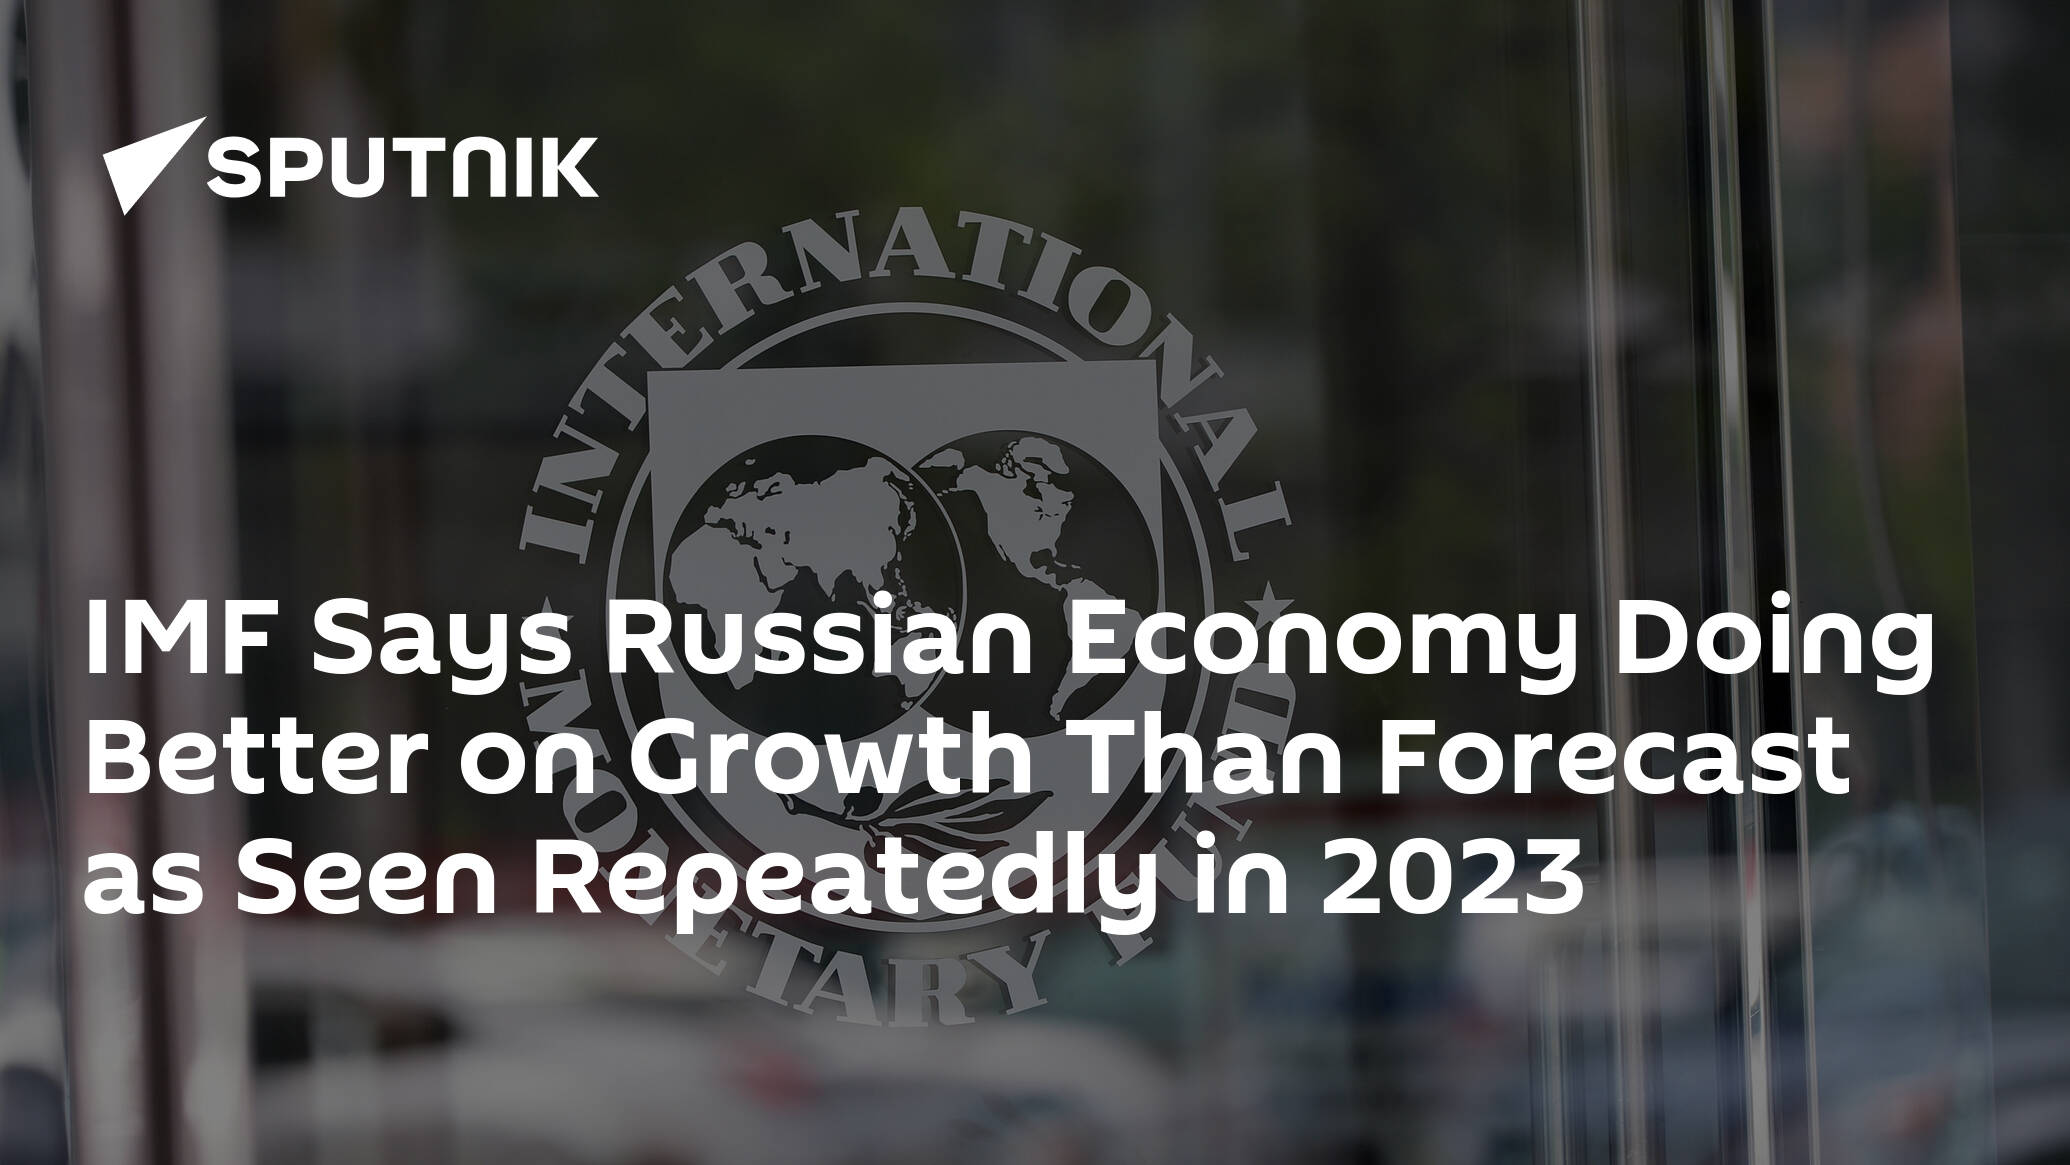 IMF Says Russian Economy Doing Better on Growth Than Forecast as Seen Repeatedly in 2023